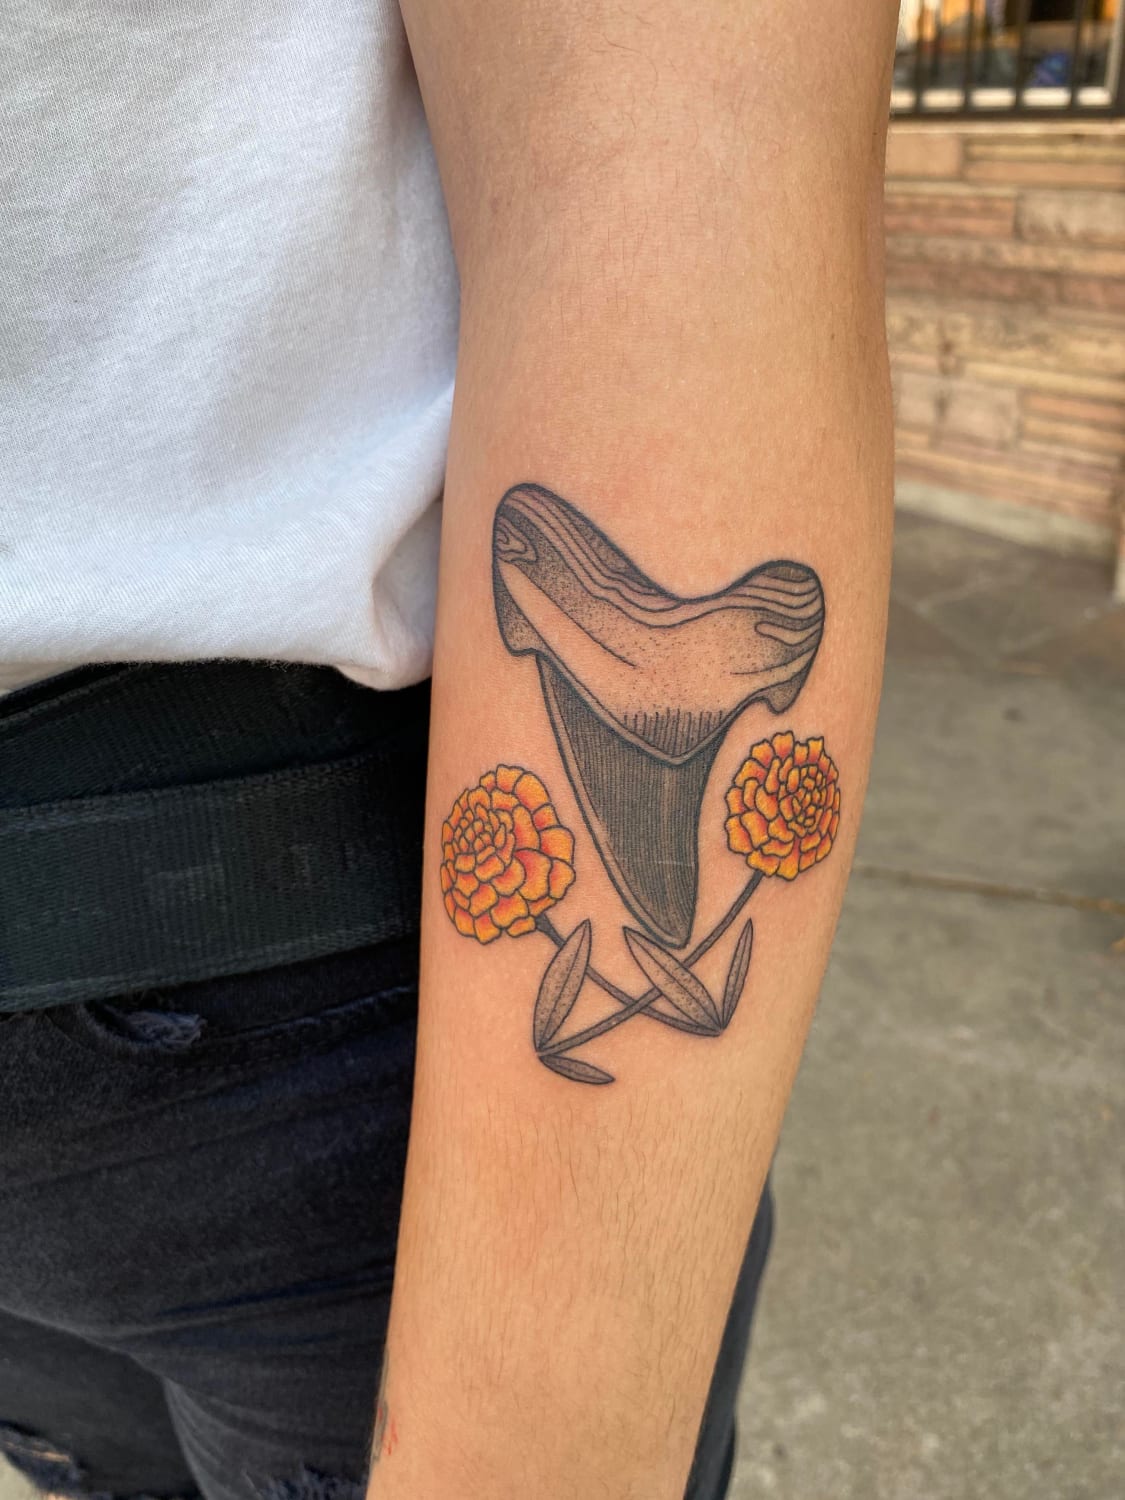 Shark Tooth with Marigolds done by Madeline at Grape Ape Tattoos. Tucson, AZ, USA.